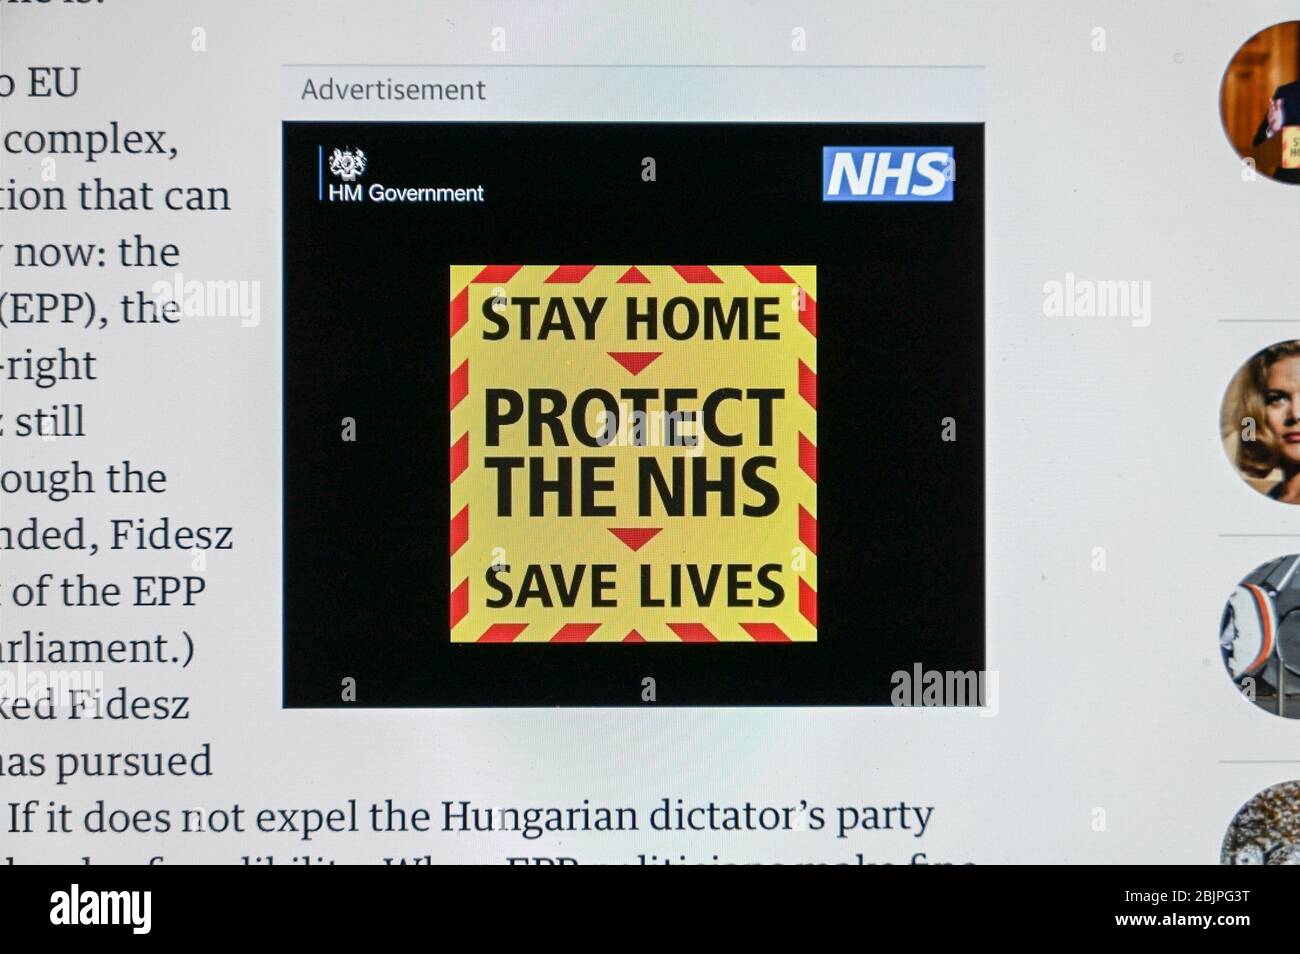 Covid/ Coronavirus. UK government public health advert 'Stay home, Protect the NHS, Save lives'. Stock Photo